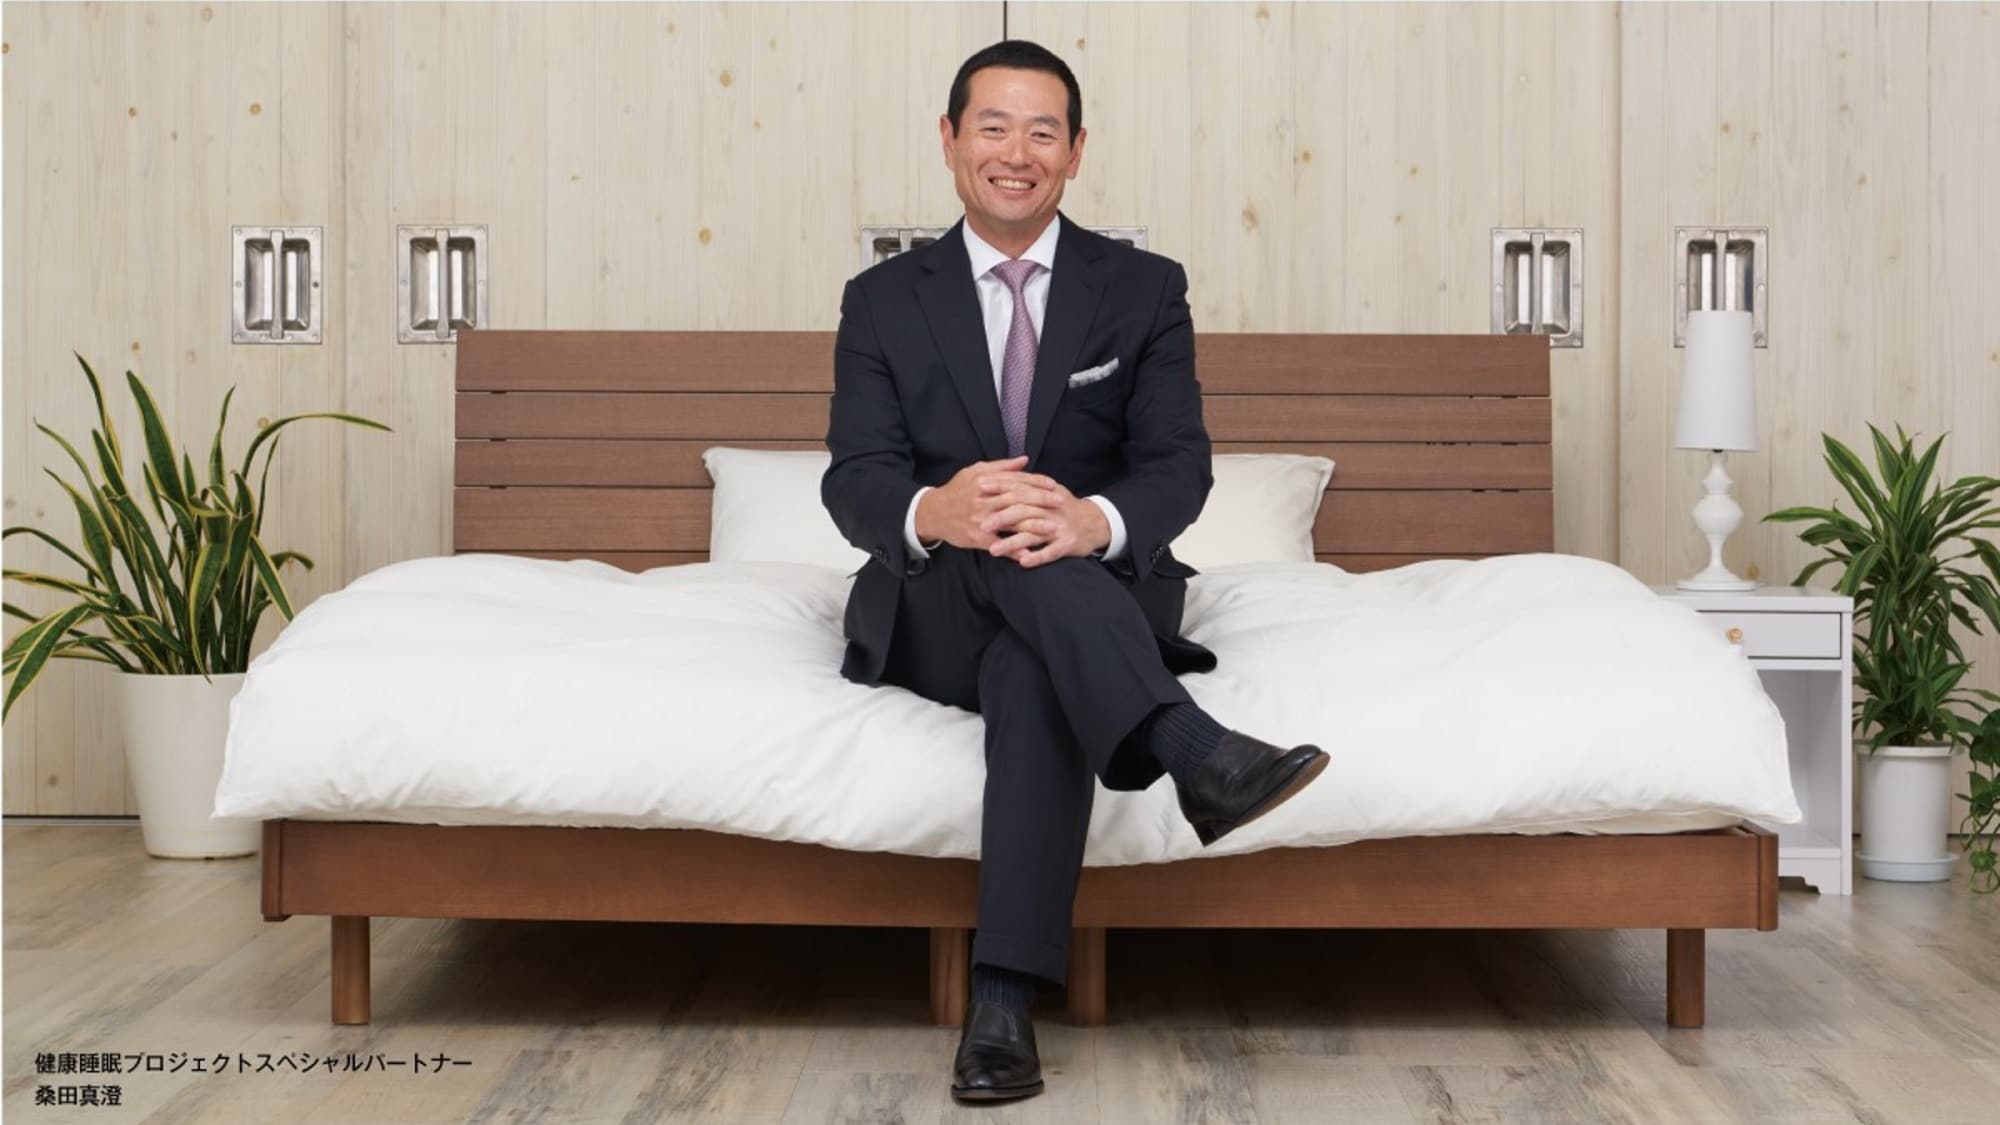 Introducing RISE mattresses in all guest rooms!